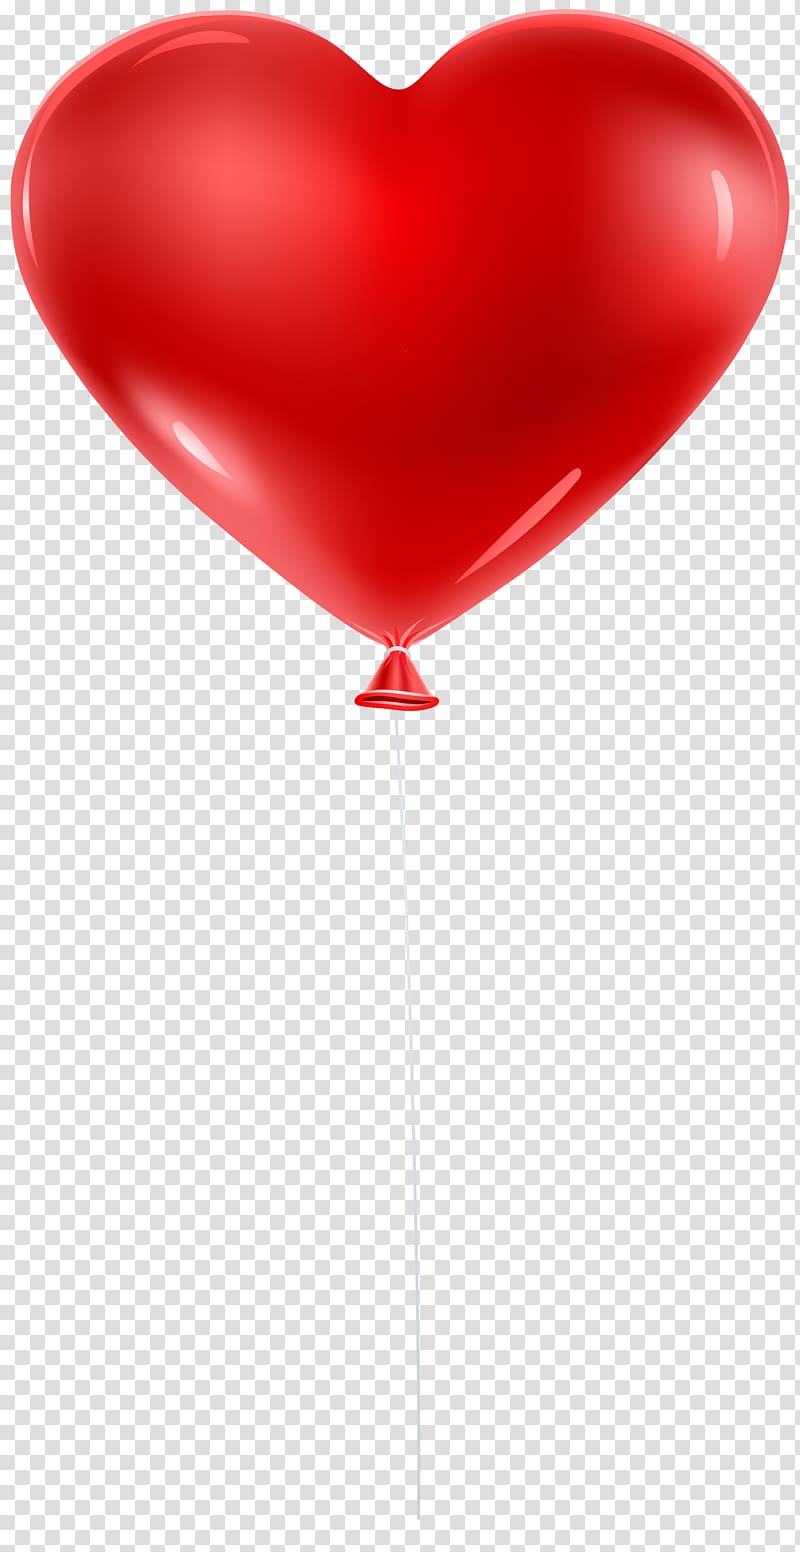 red heart balloon illustration, Heart Cardiovascular disease Circulatory system Myocardial infarction Health, Red Balloon Heart transparent background PNG clipart